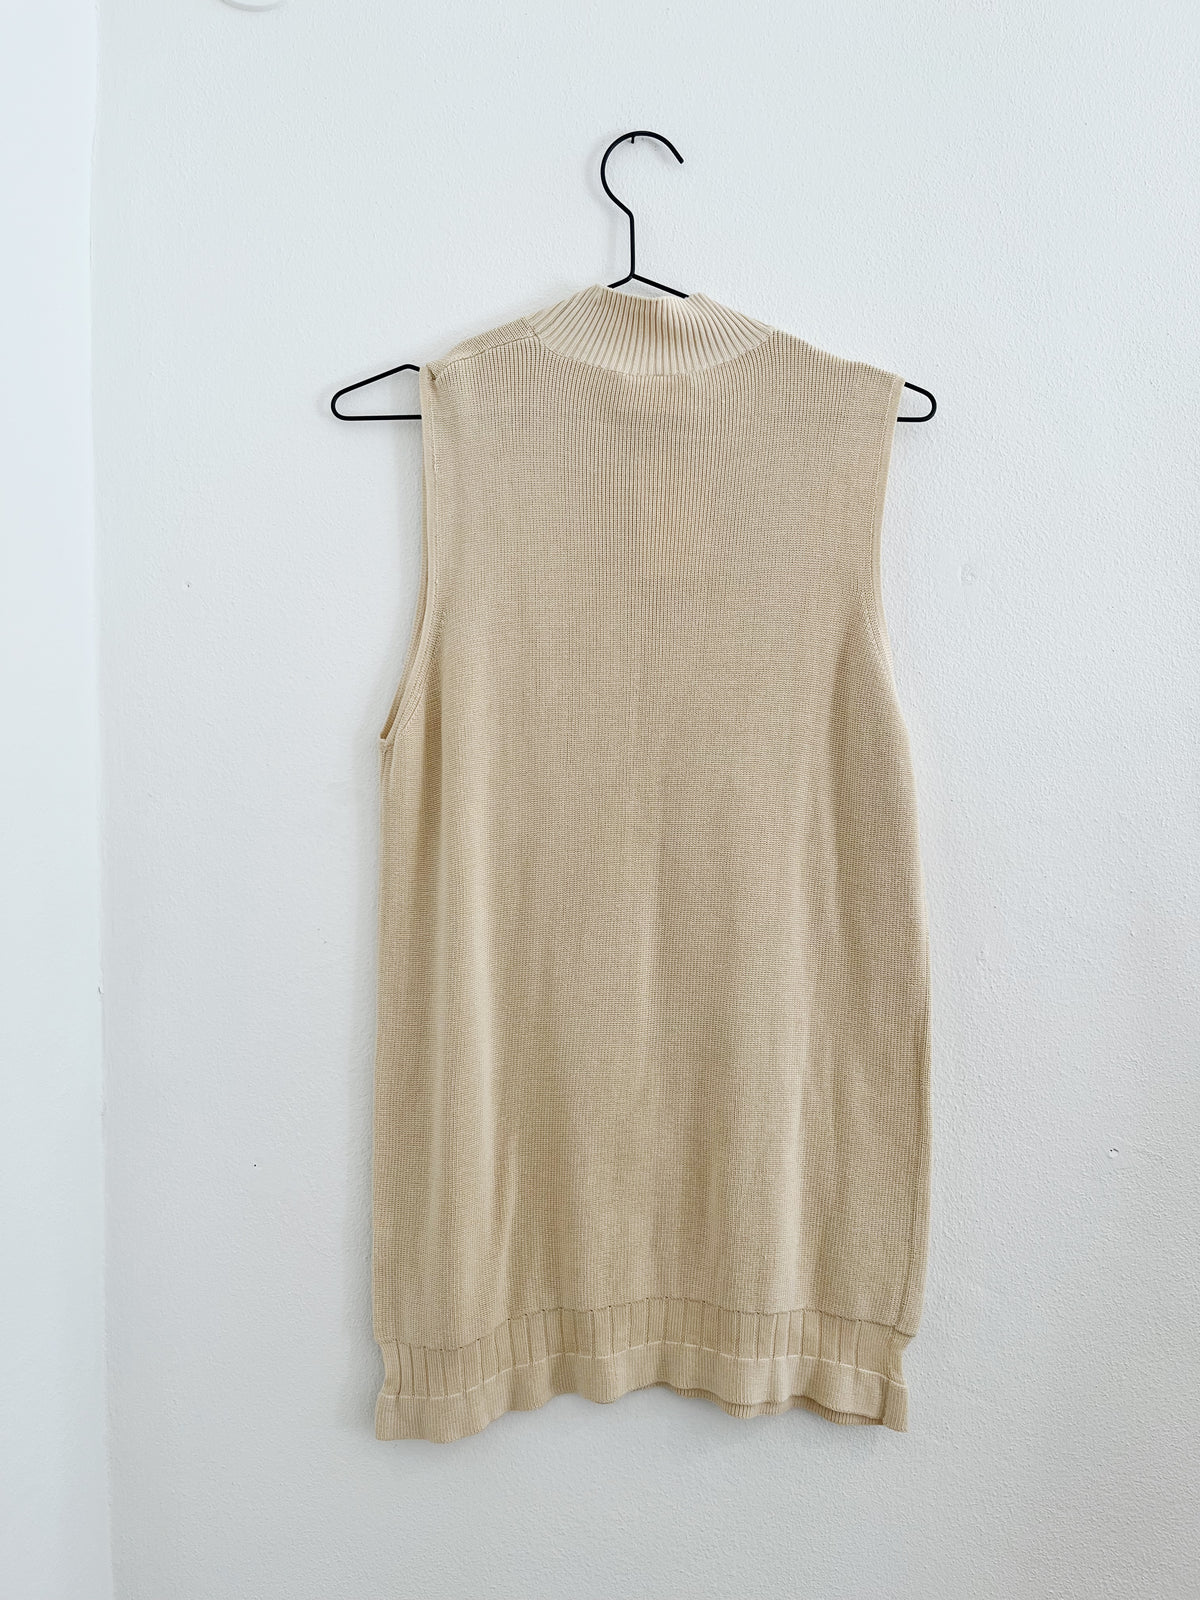 Betty Barclay top/vest